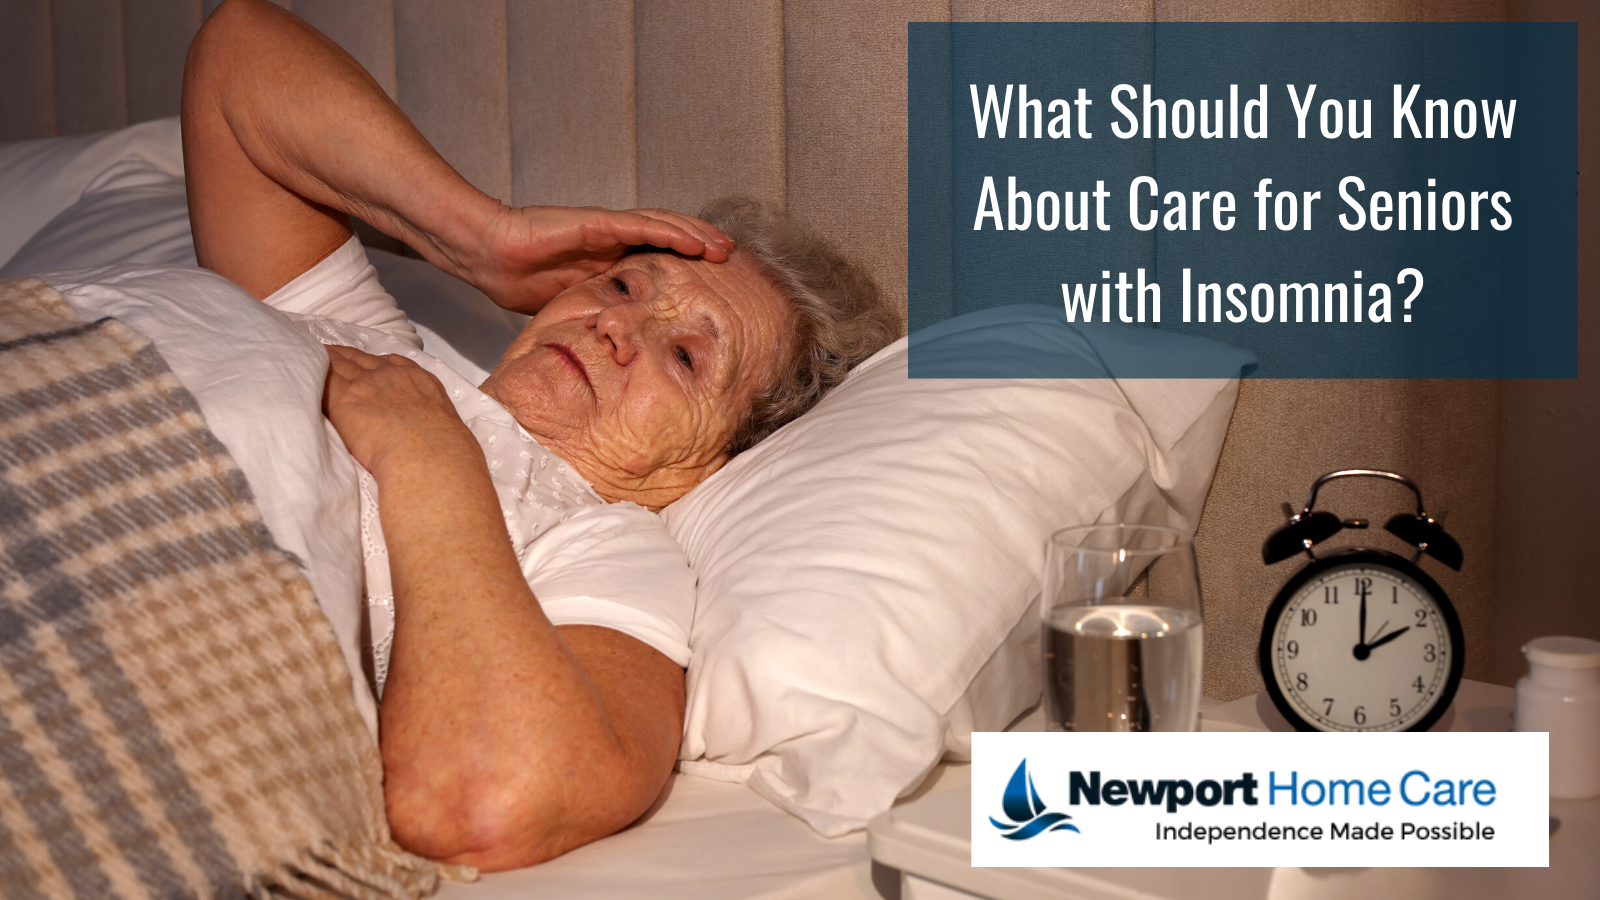 What Should You Know About Care for Seniors with Insomnia?